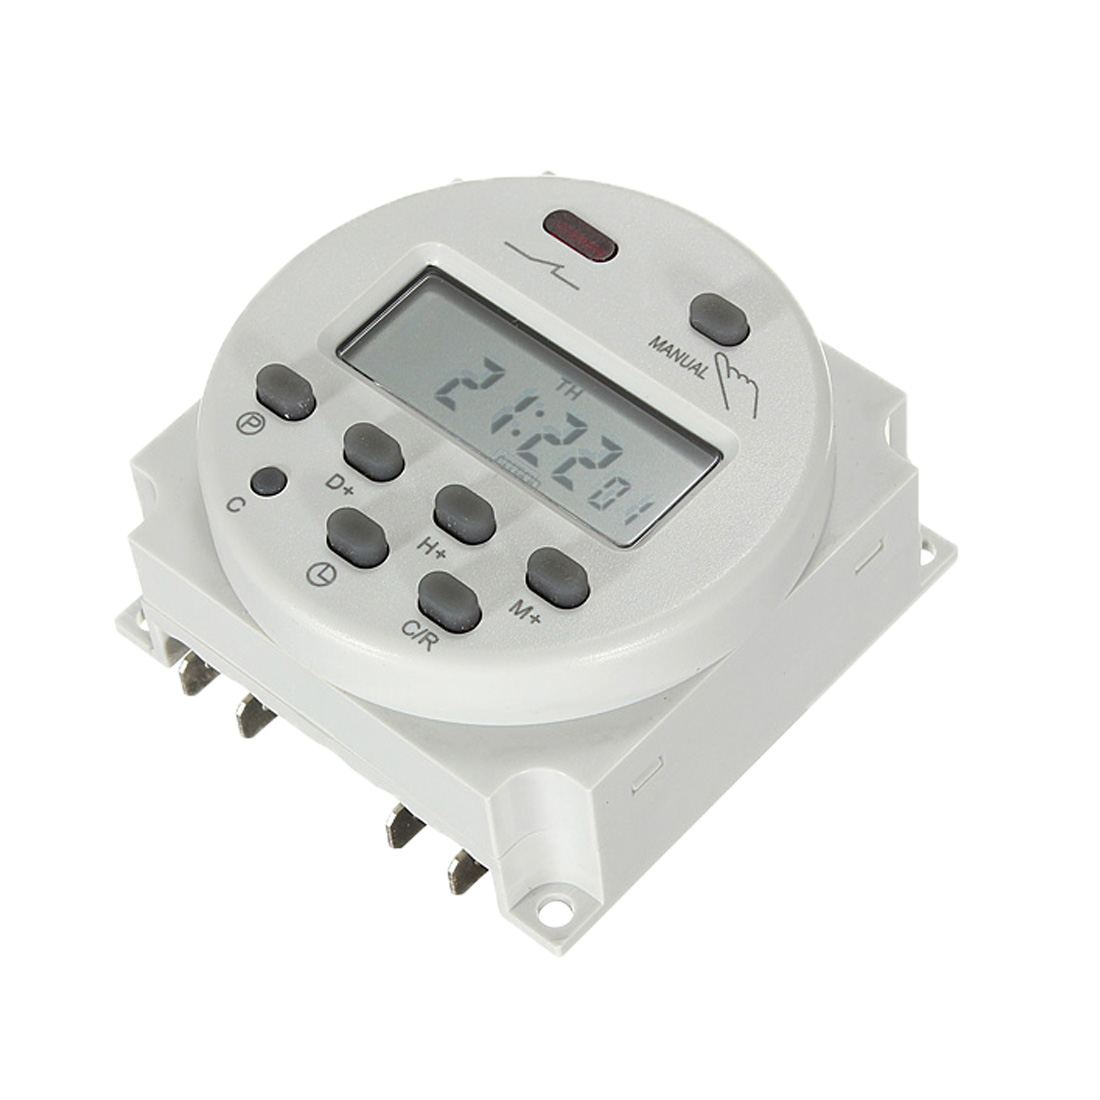 2pcs AC 220V Digital Round Timer Time Switch Support TT-101A